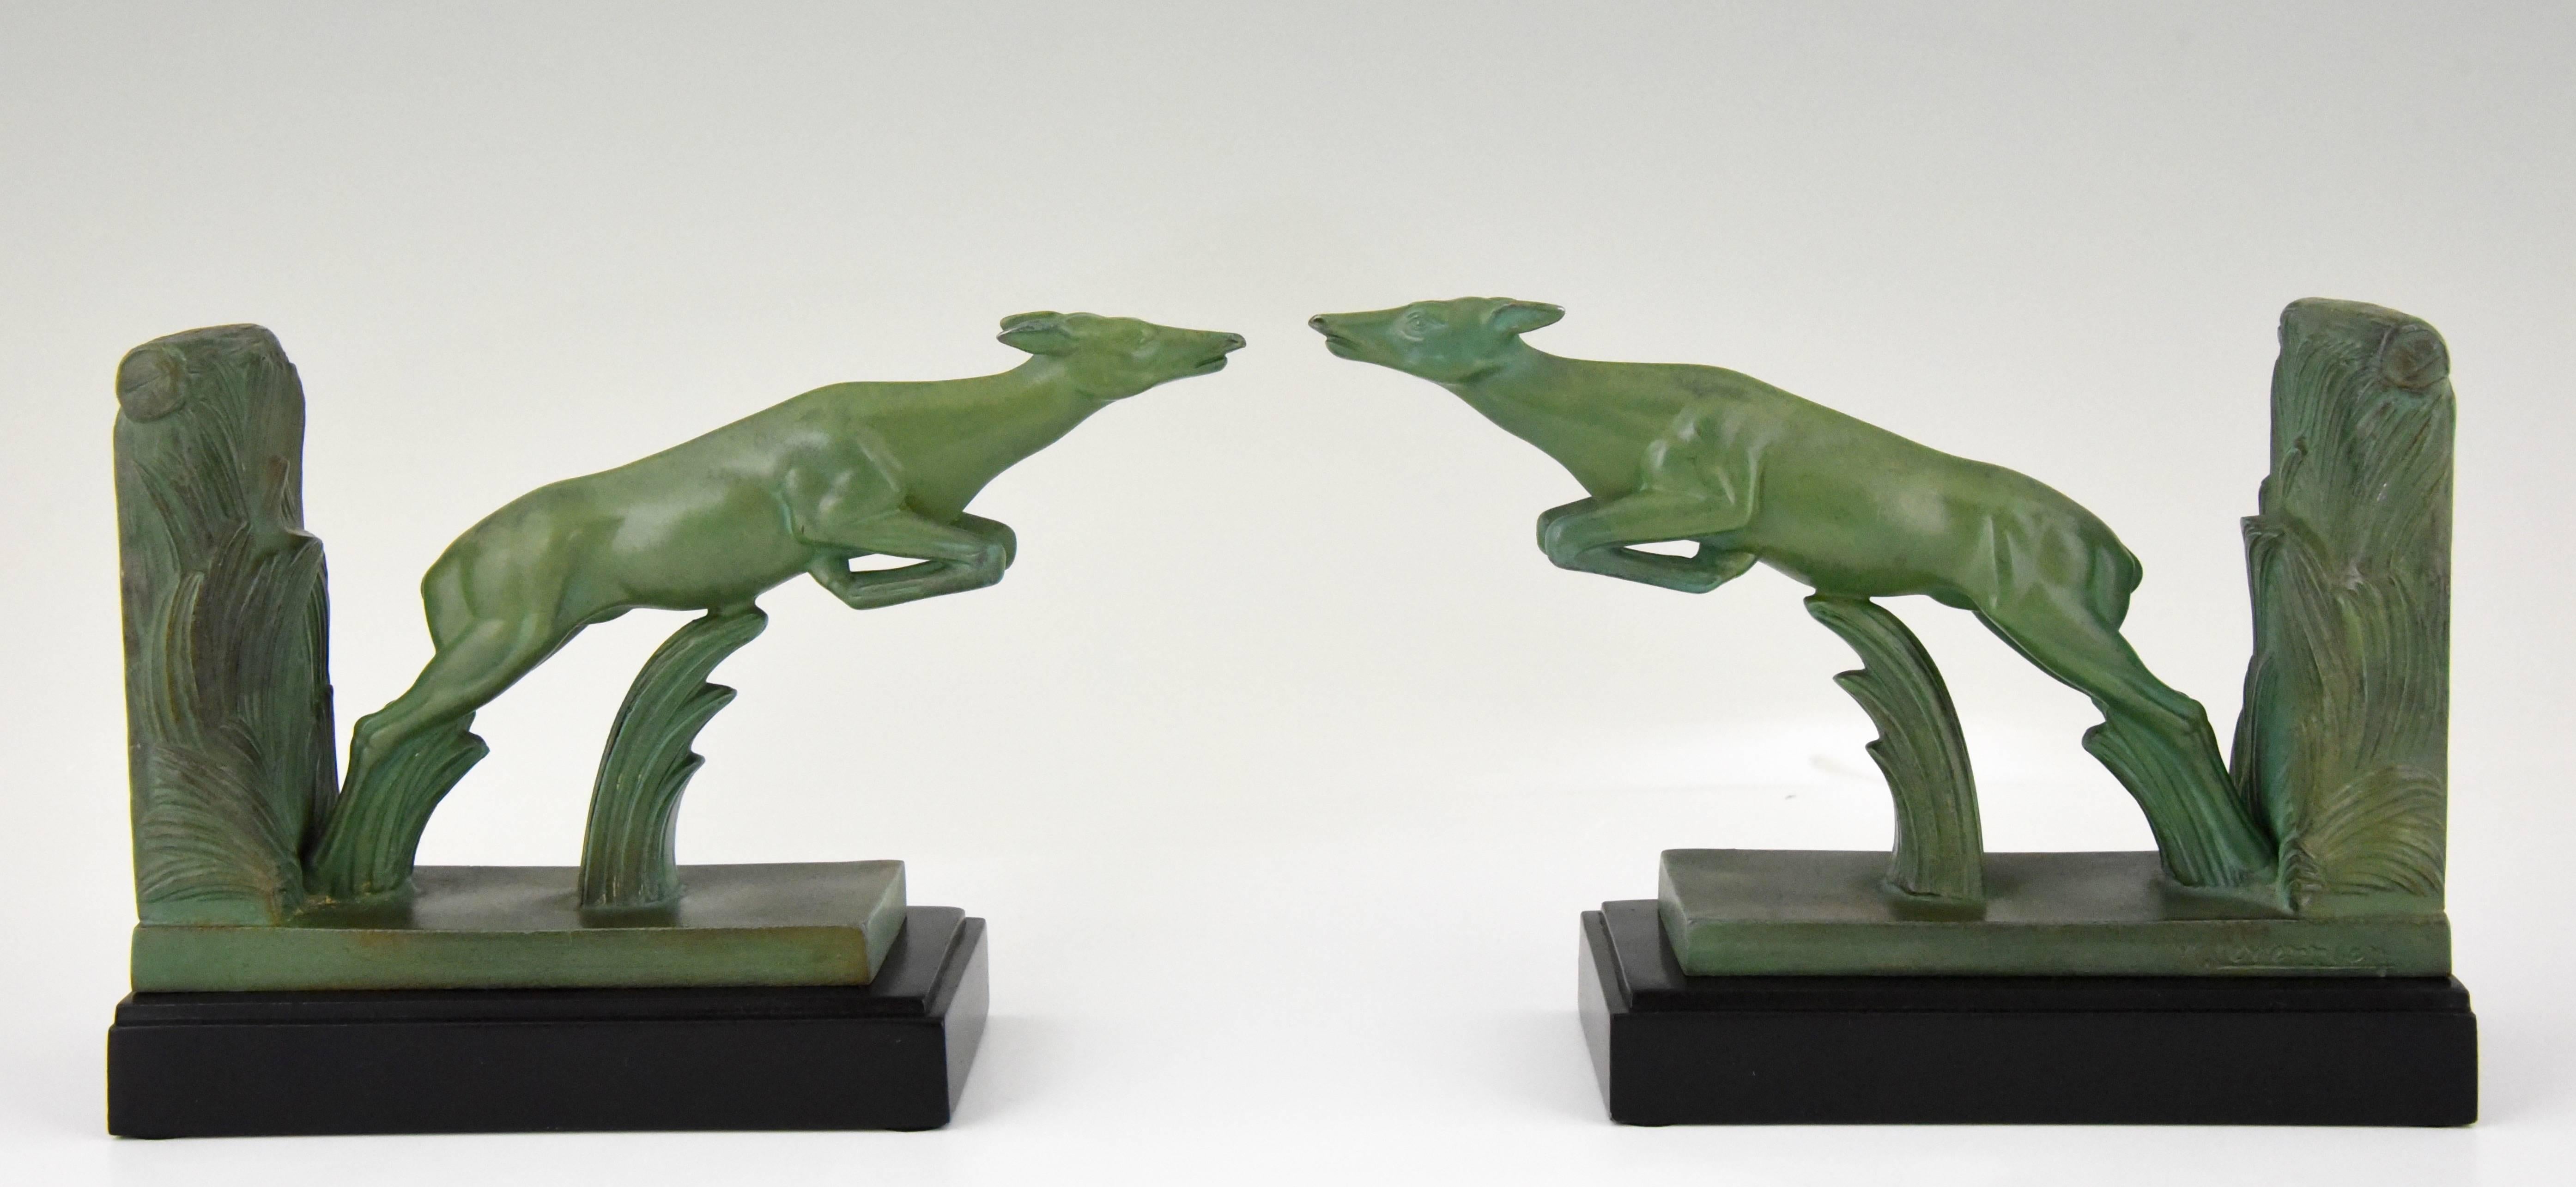 A nice pair of French Art Deco bookends with jumping deer by Max Le Verrier. 
Signature/ Marks: M. Le Verrier
Style: Art Deco
Date: 1930
Material: Patinated metal.
Origin: France.
Size: H. 13 cm. x L. 18 cm. x W. 6.5 cm. ? 
H. 5.1 inch x L.